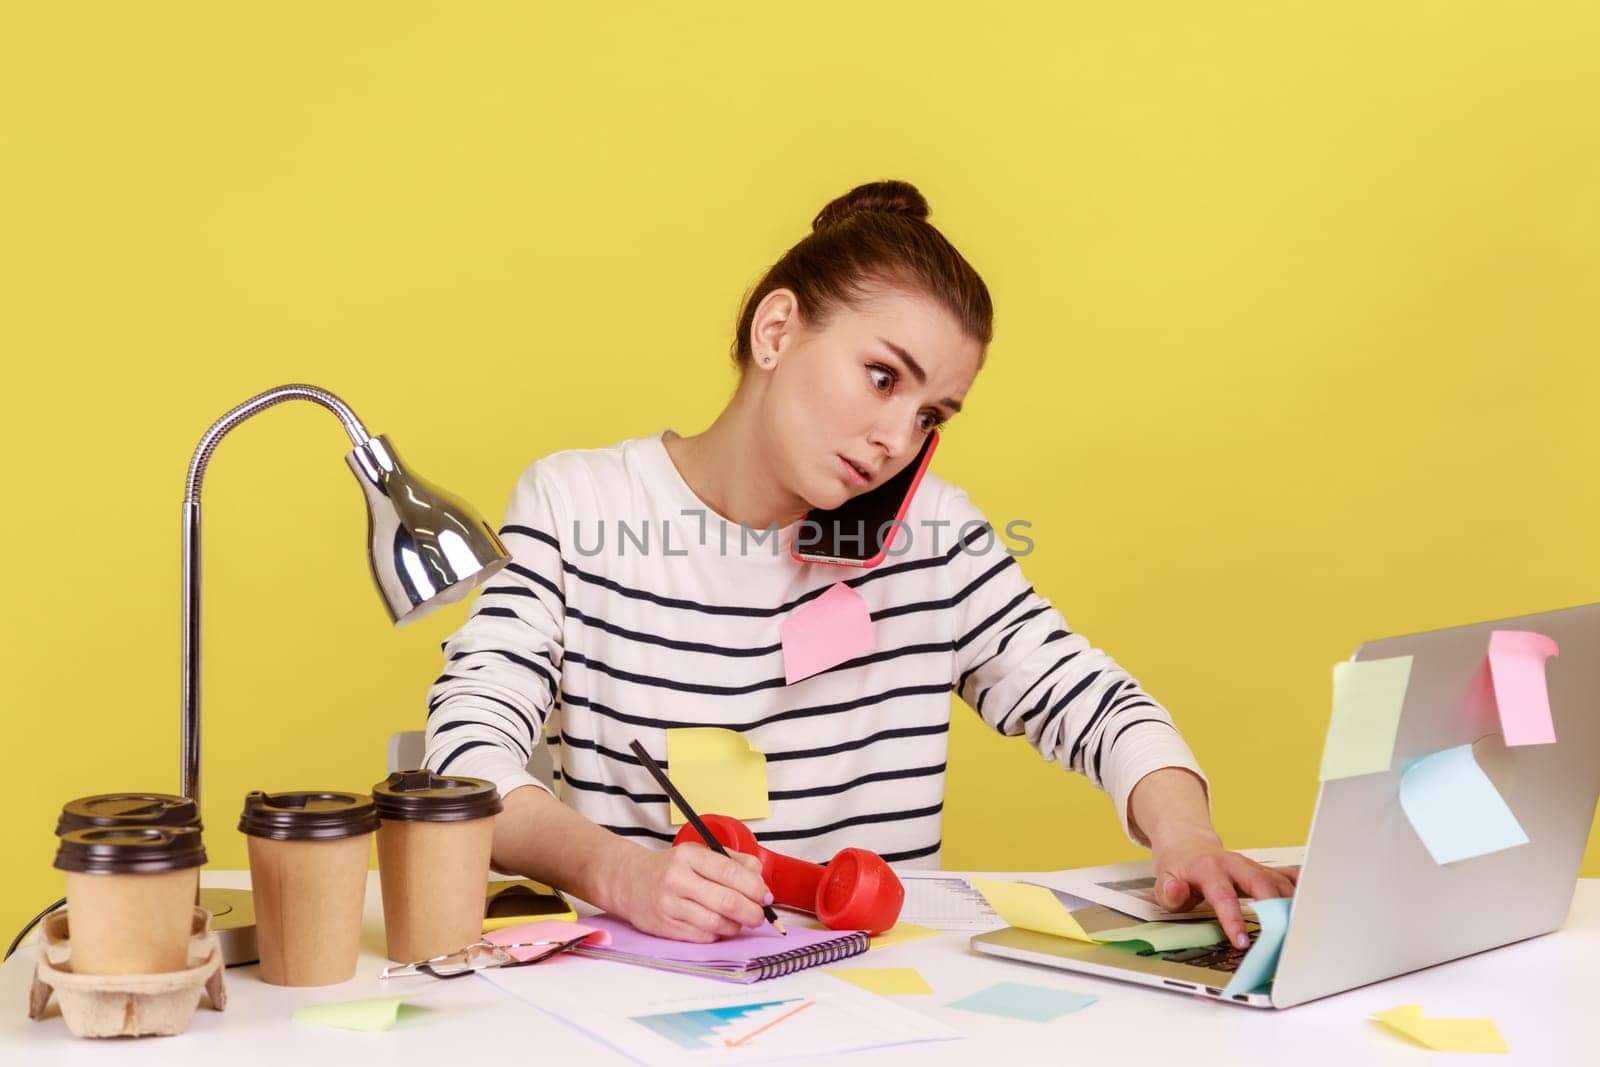 Concentrated secretary in striped shirt receiving calls on phone and making notes, writing down information, sitting at workplace with laptop. Indoor studio studio shot isolated on yellow background.